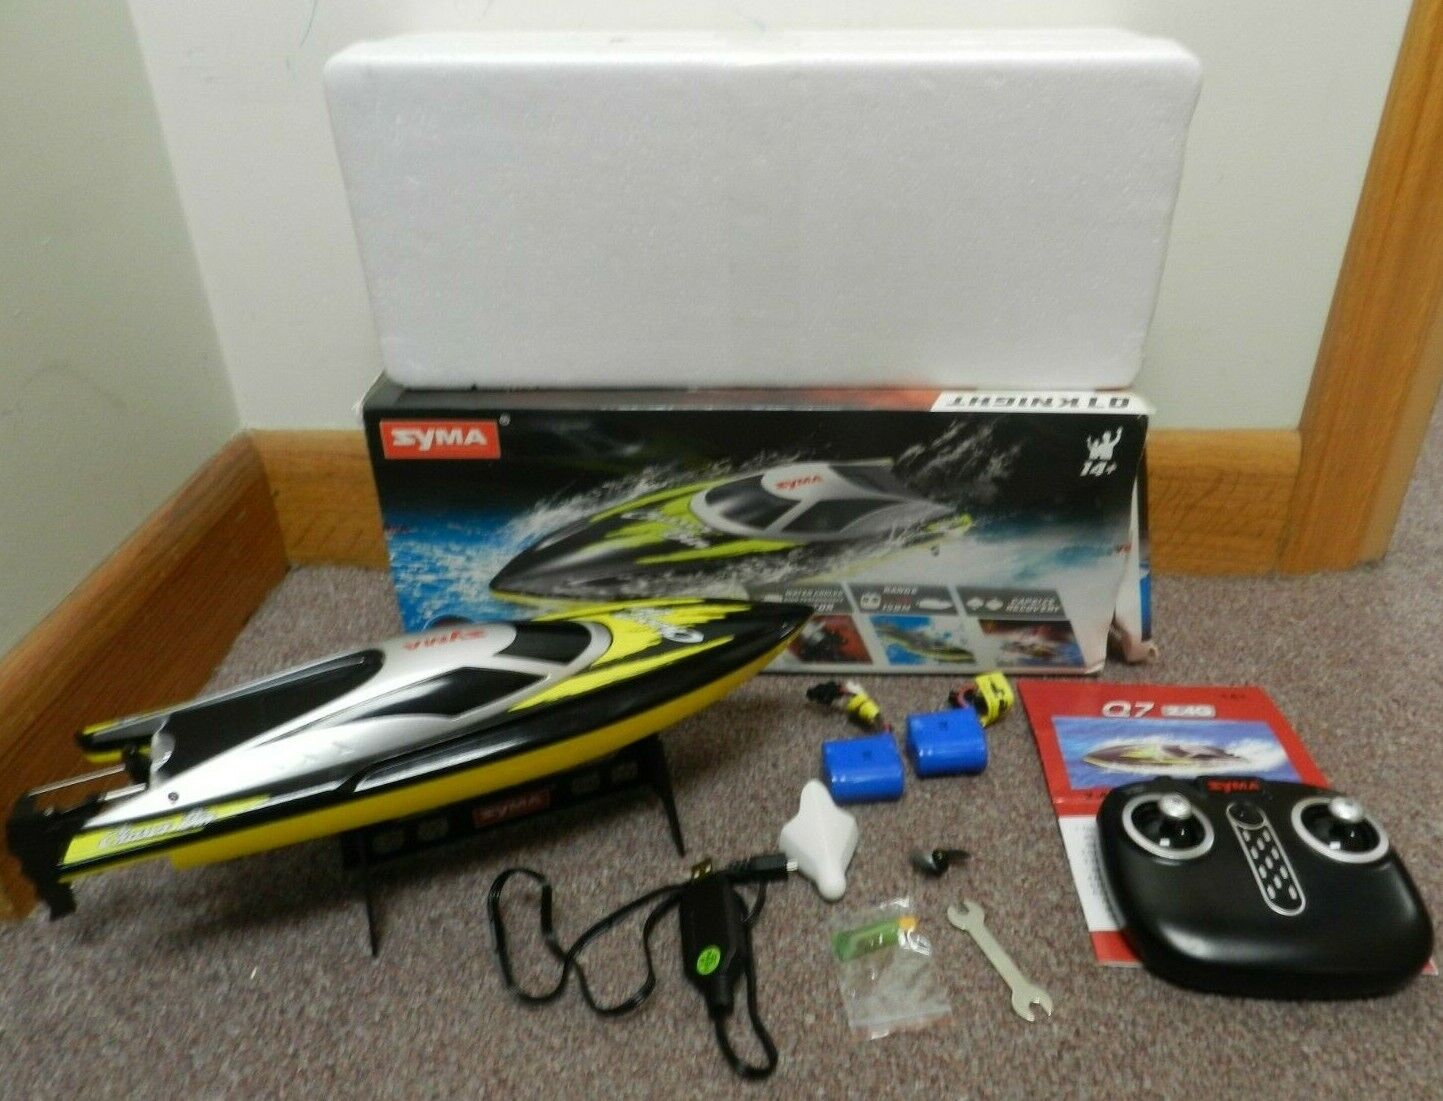 SYMA Q7 Knight RC Las Vegas Mall Remote Control Boat km Kids h shopping for Adults 20+